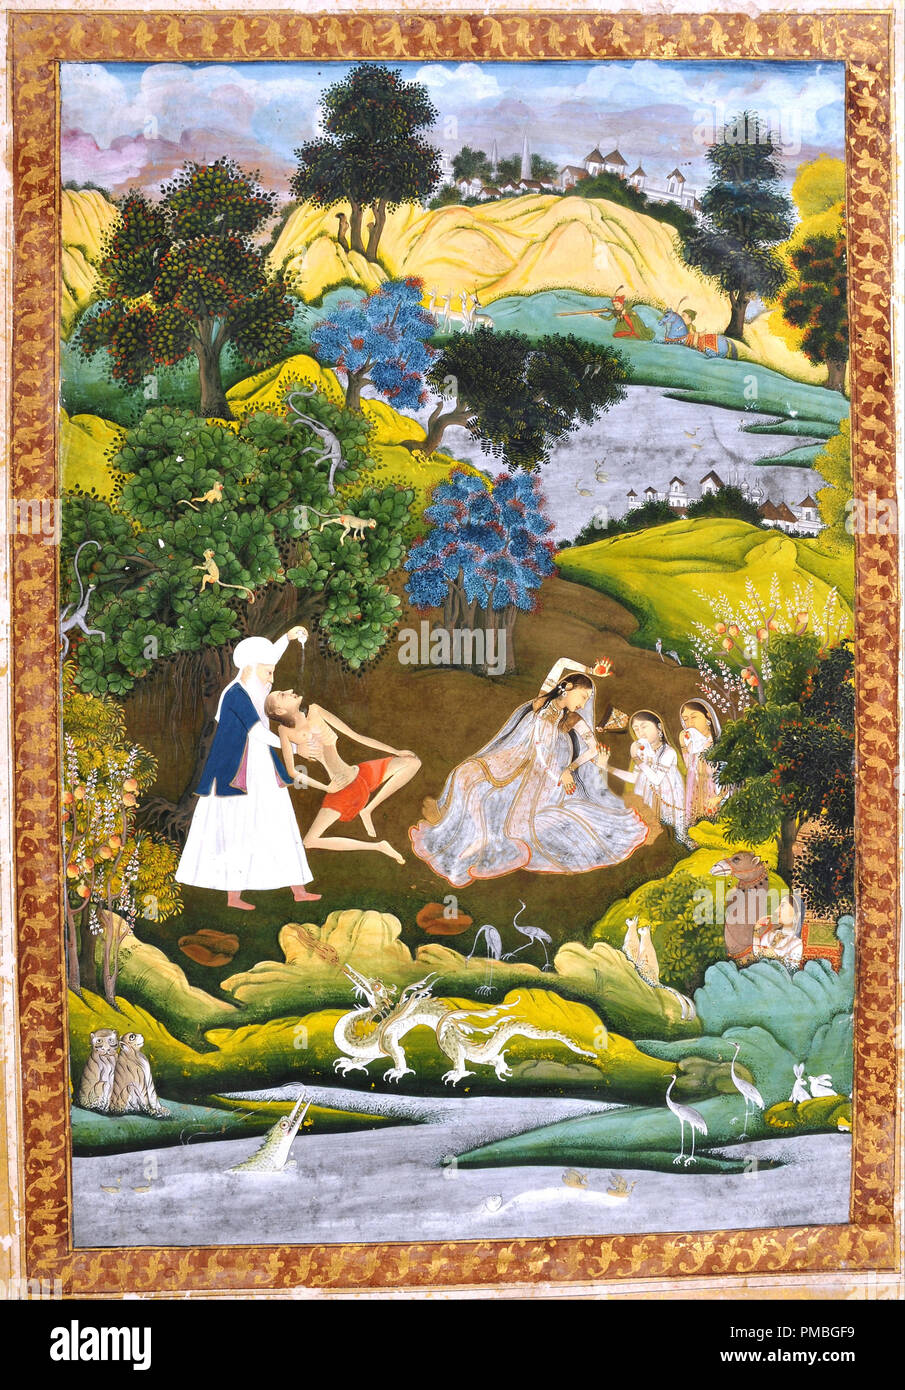 Fainted Laila and Majnun-Based on the Khamsa of Persian poet Nizami. Date/Period: 1740 - 1750. Painting. Height: 325 mm (12.79 in); Width: 480 mm (18.89 in). Author: UNKNOWN. Stock Photo